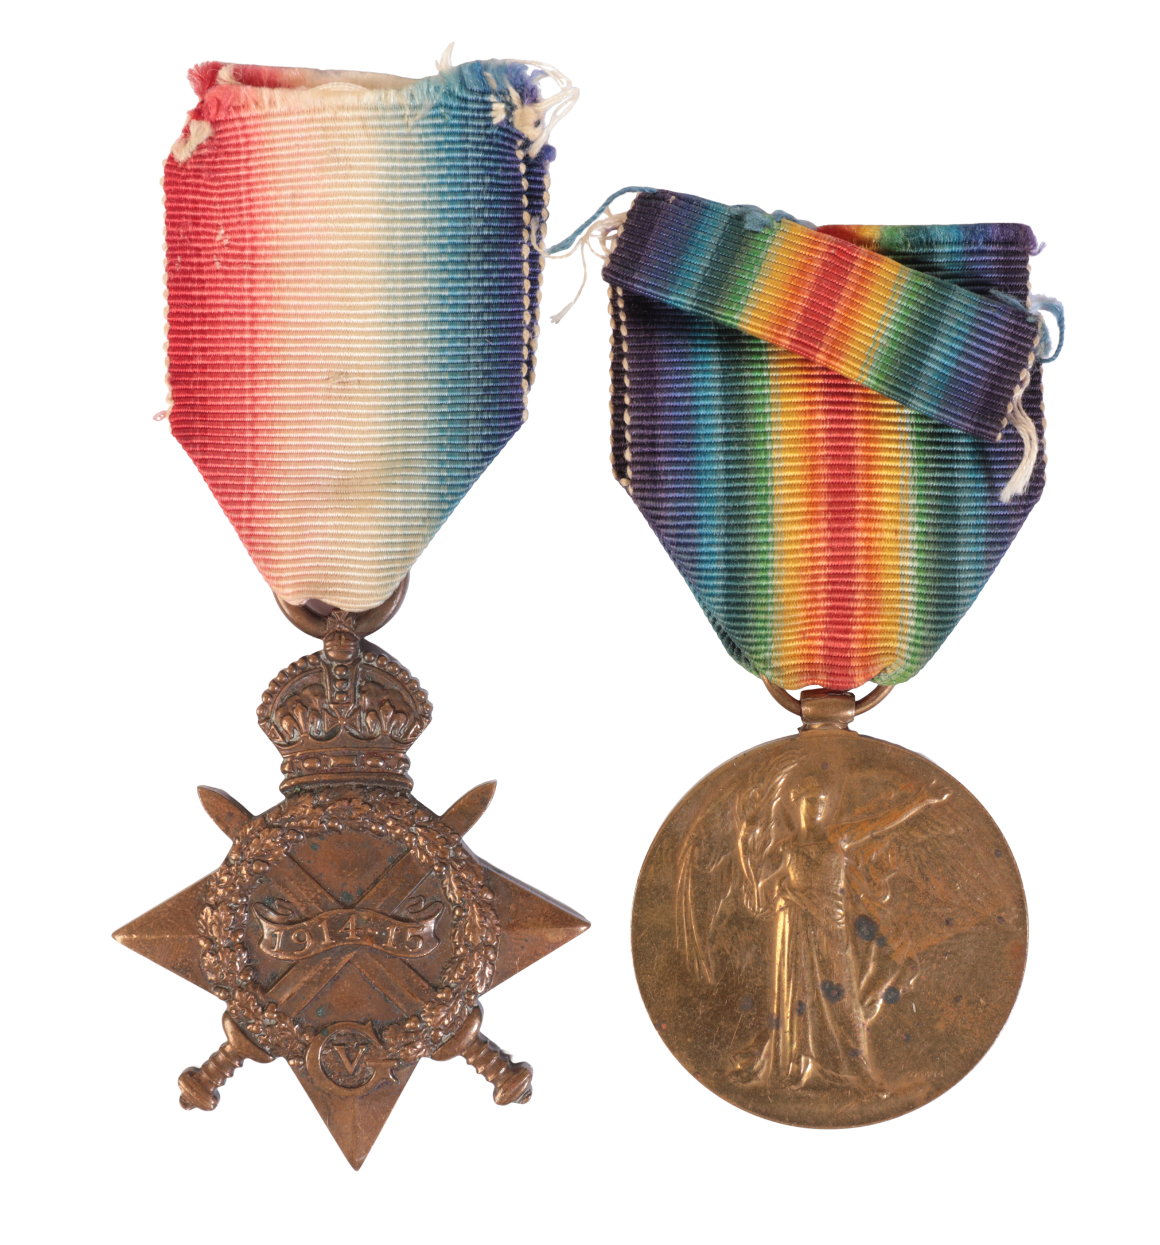 1914/15 STAR AND VICTORY MEDAL